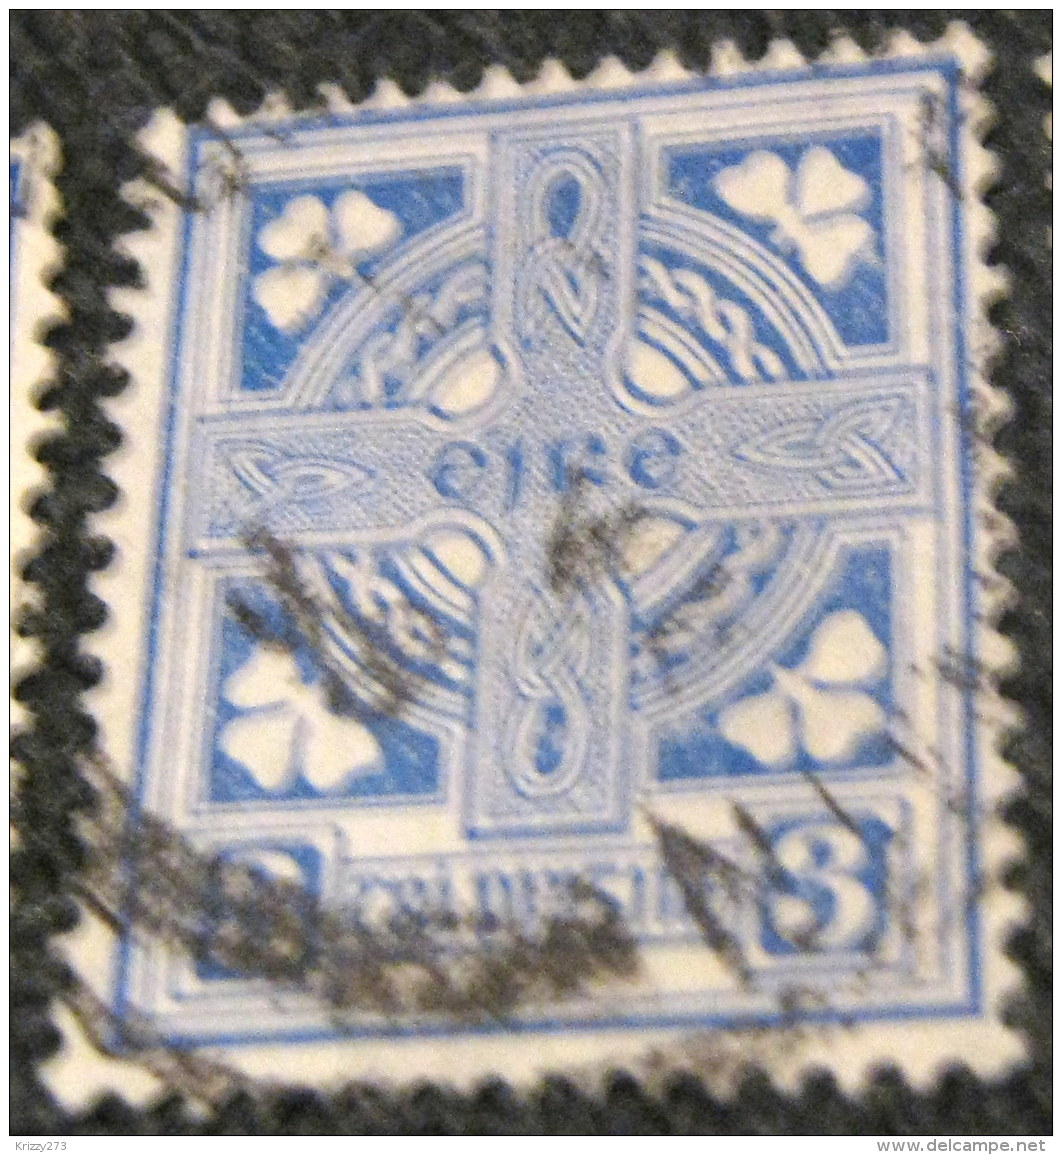 Ireland 1922 Celtic Cross 3p - Used - Used Stamps